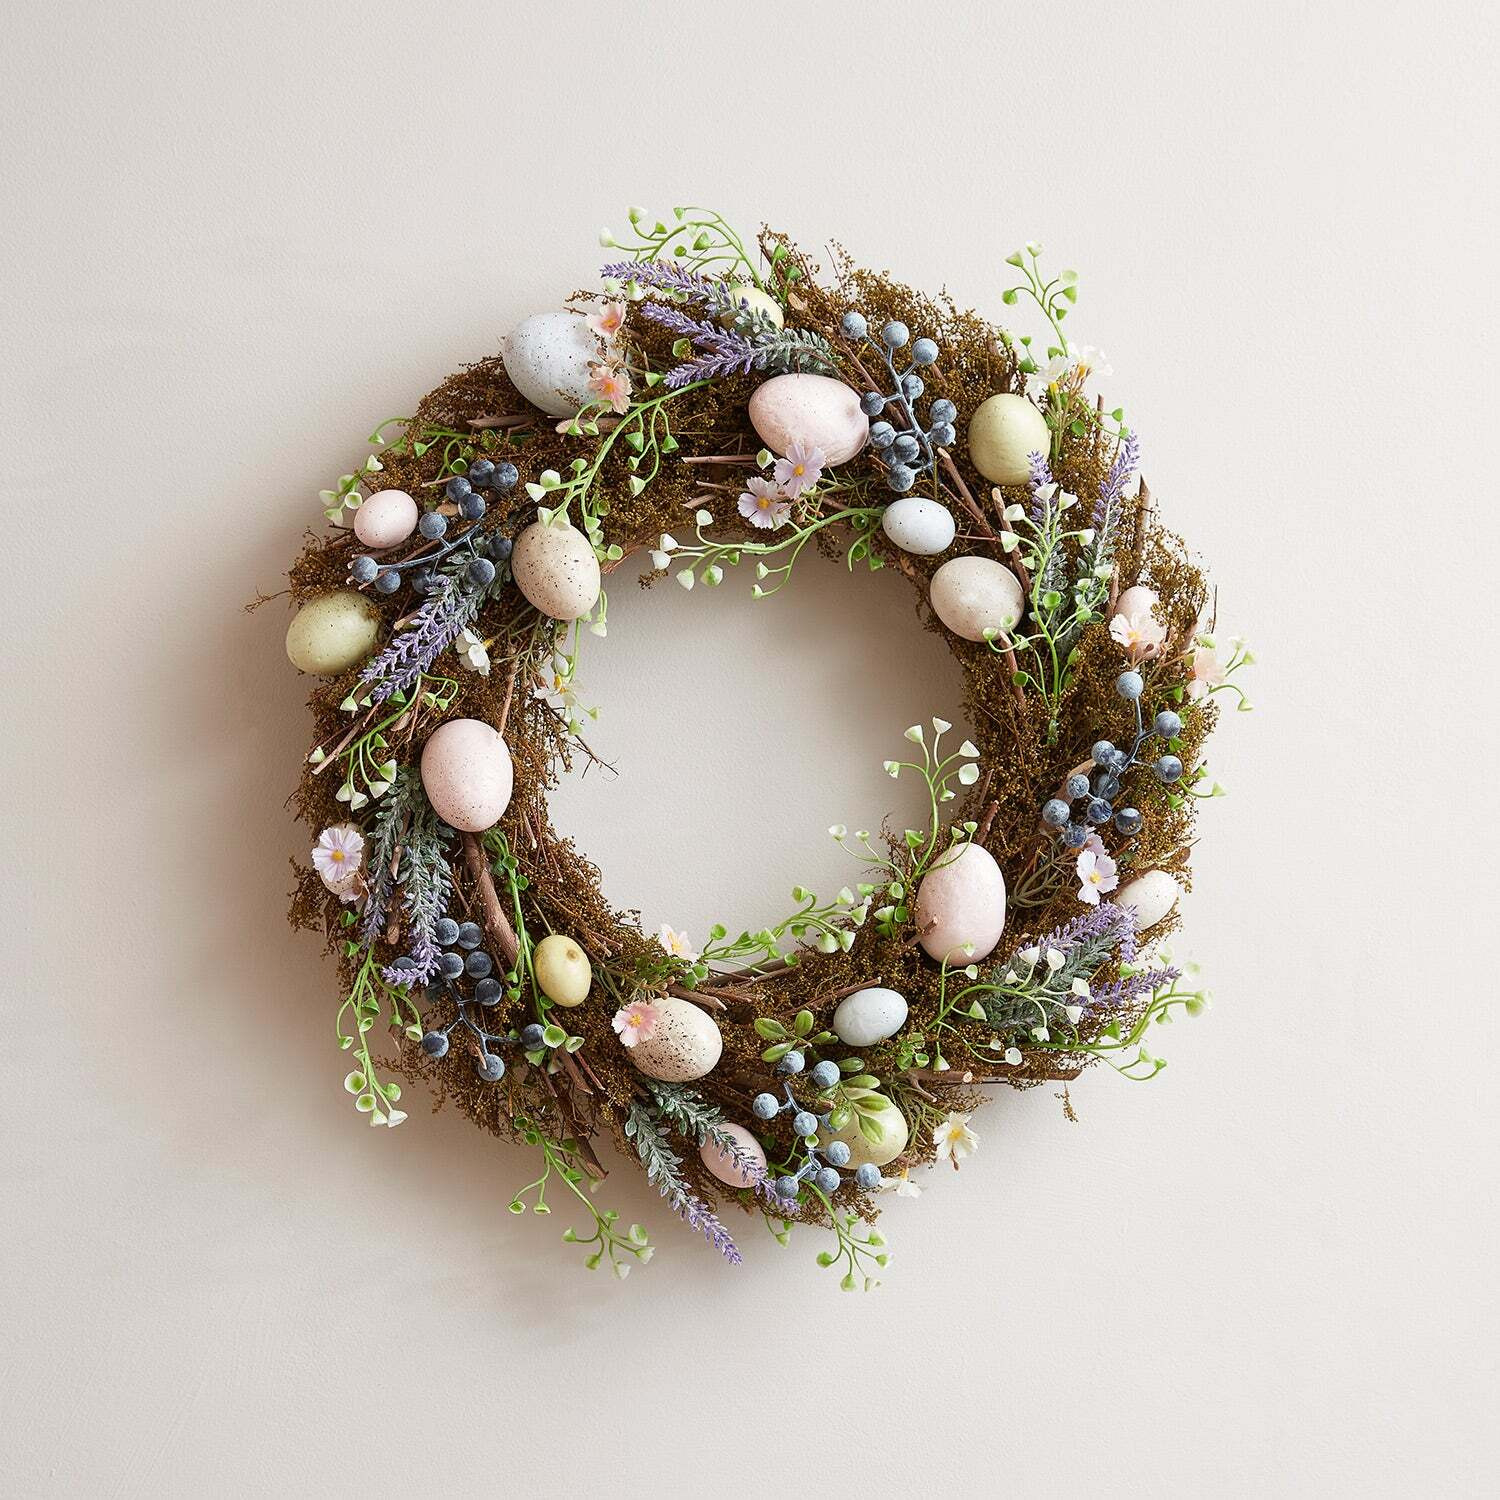 43cm Mossy Easter Wreath - image 1